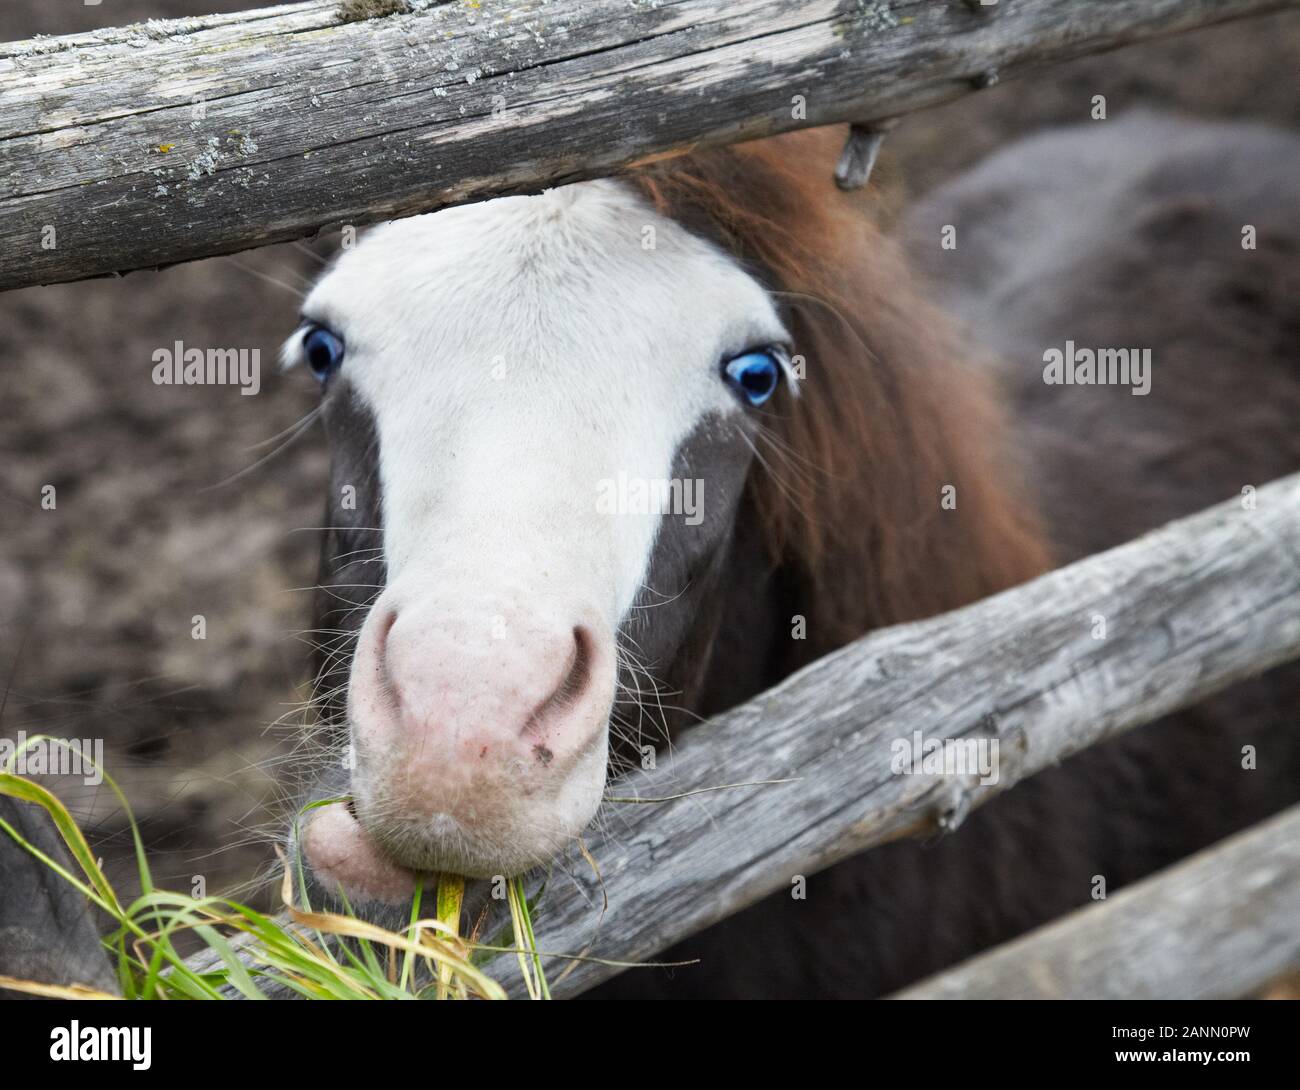 Cute little foal pony with blue eyes eating a grass Stock Photo